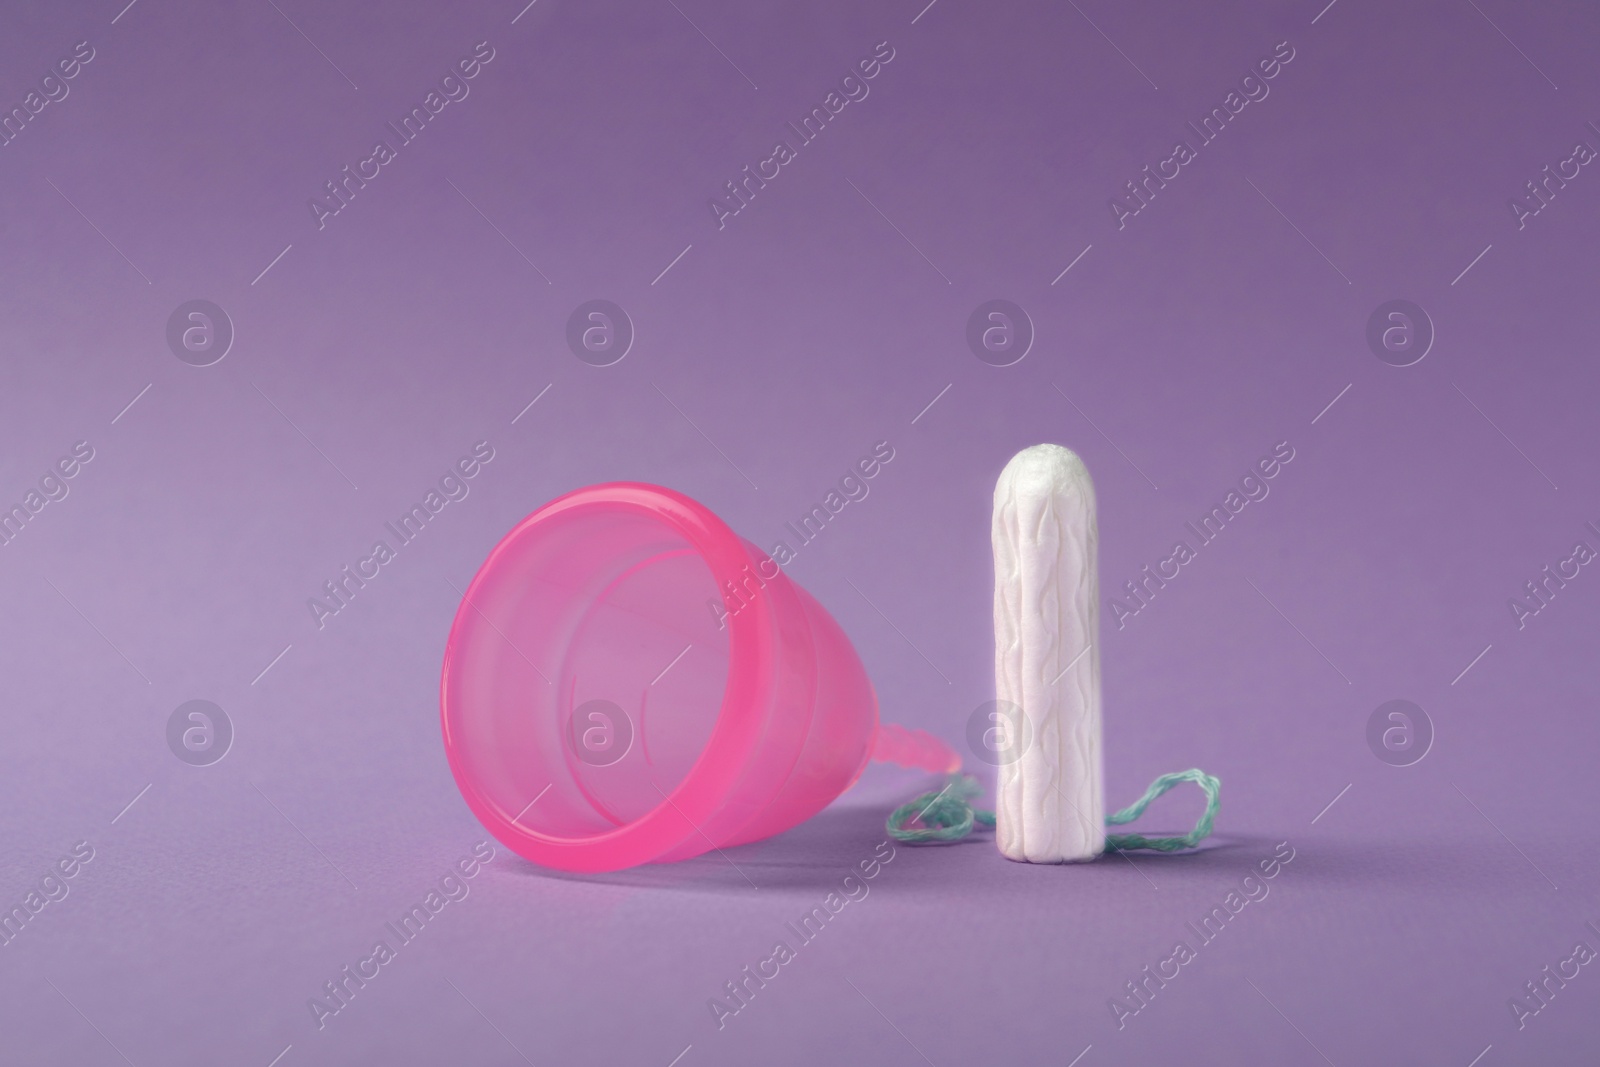 Photo of Menstrual cup and tampon on violet background